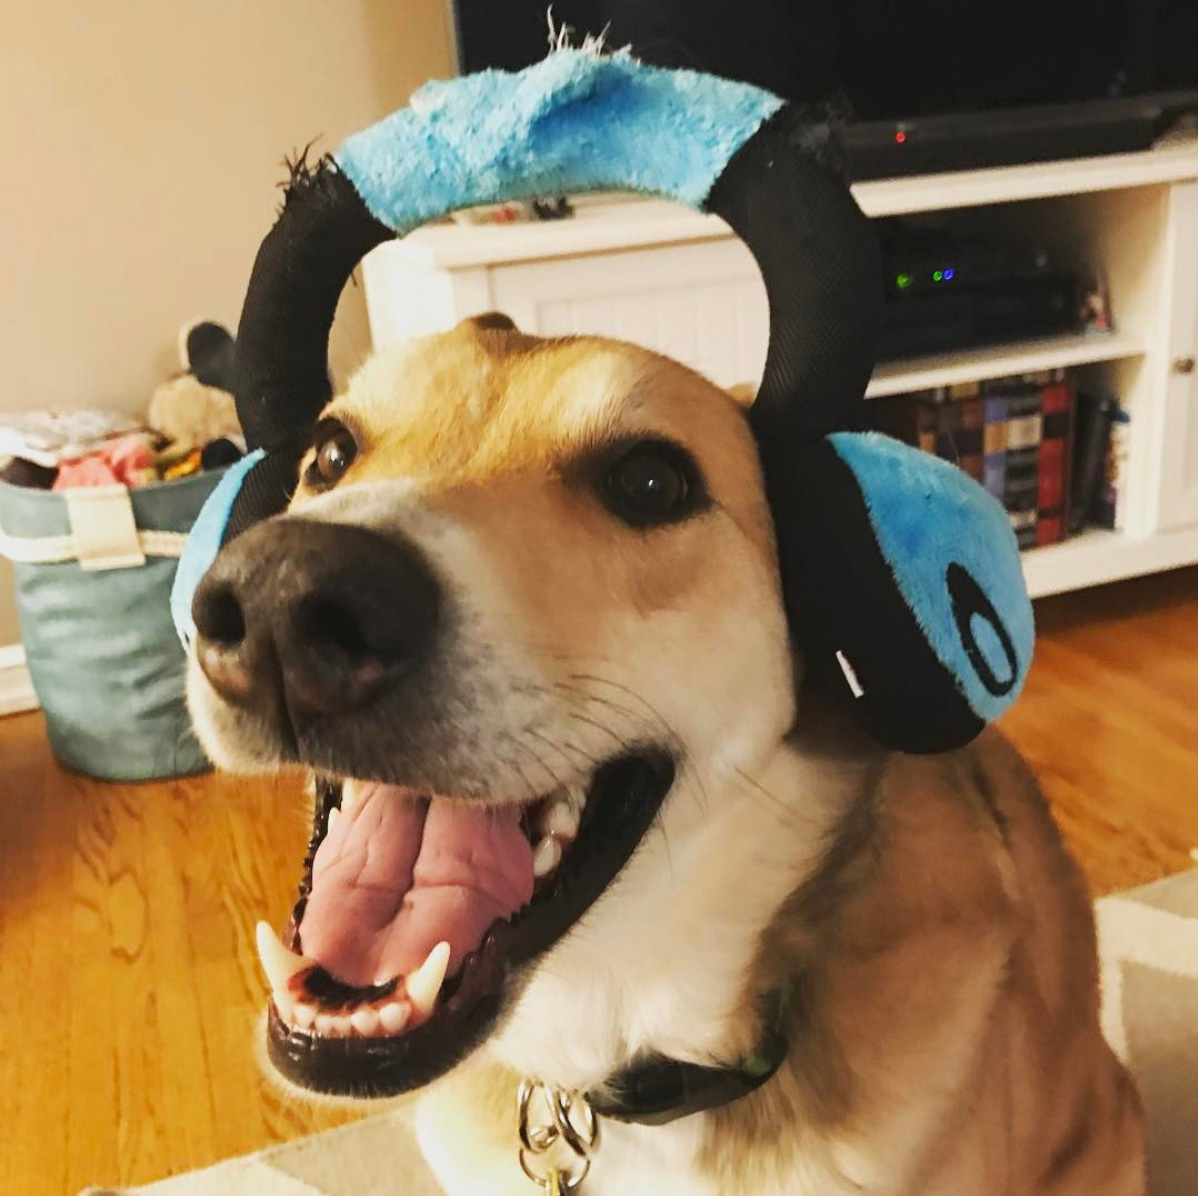 A cute dog with an endearing smile wearing stuffed DJ headphones